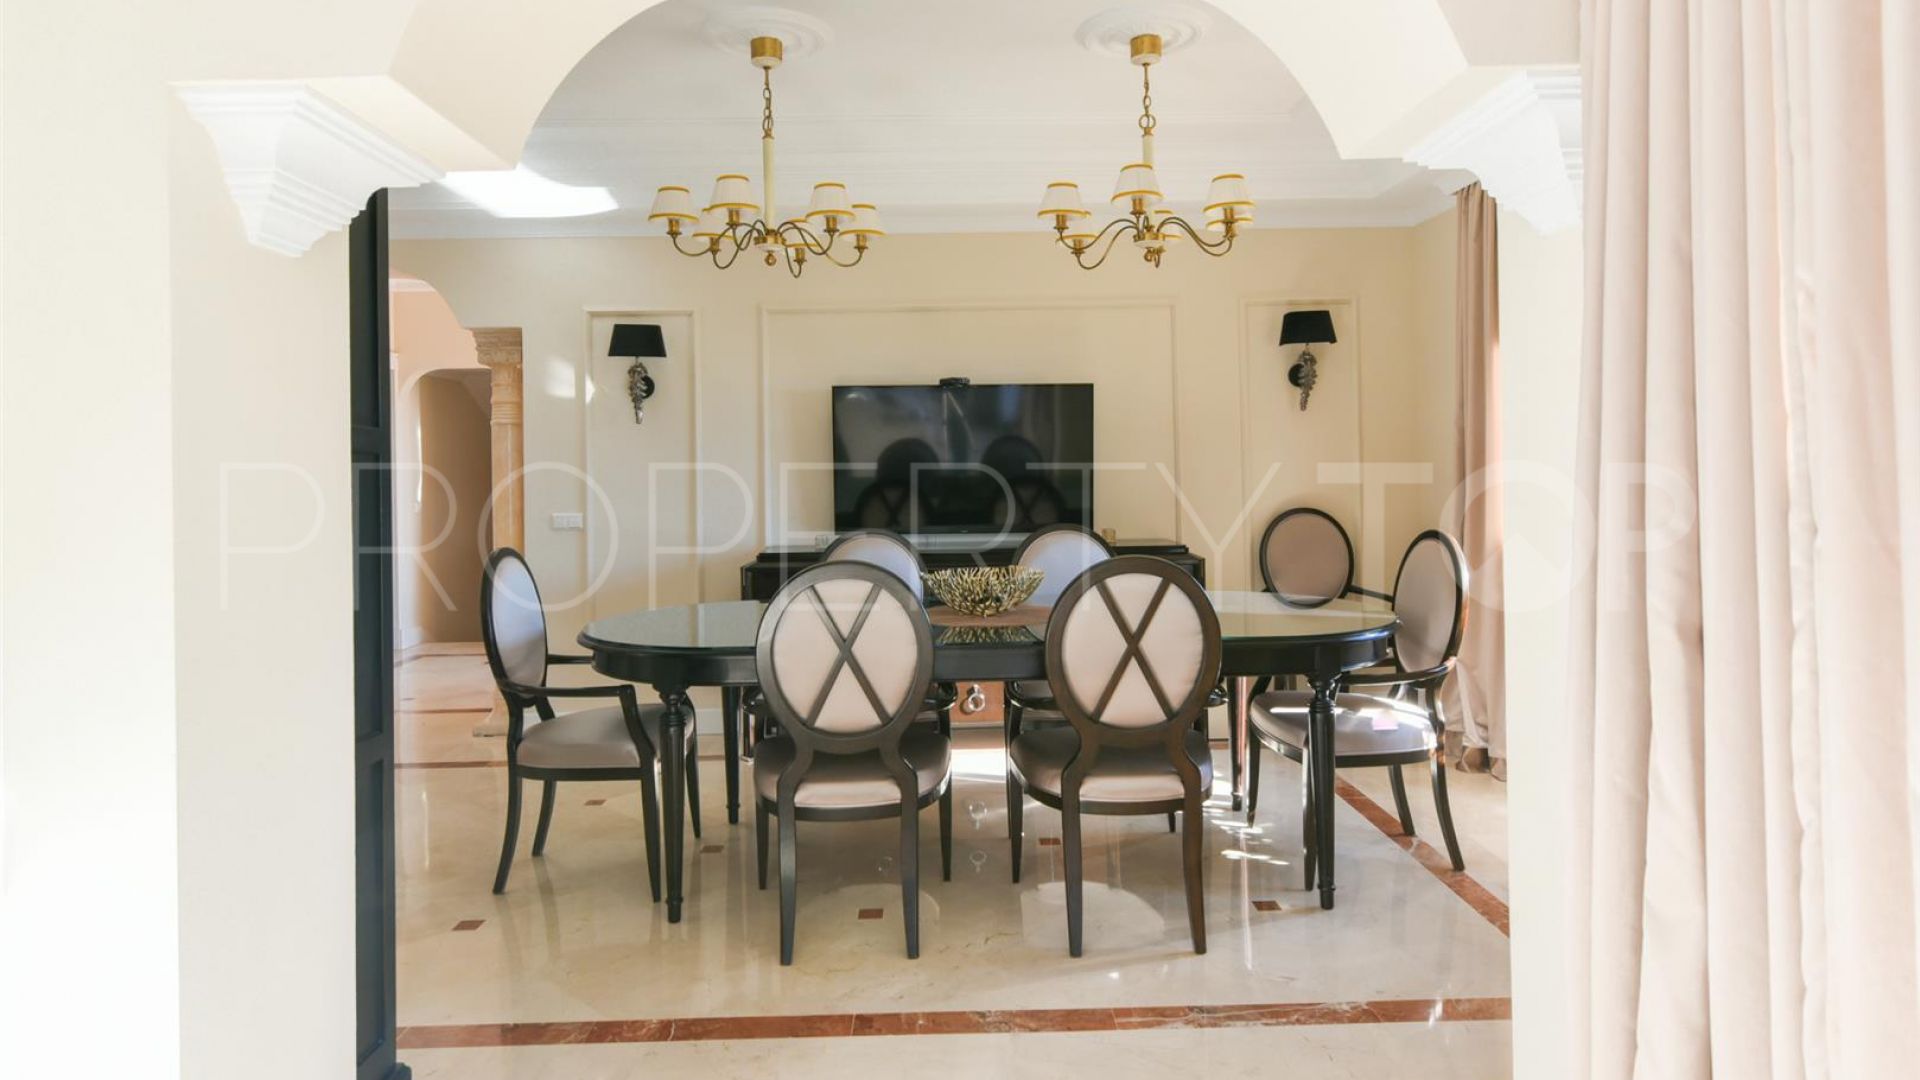 Villa for sale in Rio Real with 5 bedrooms